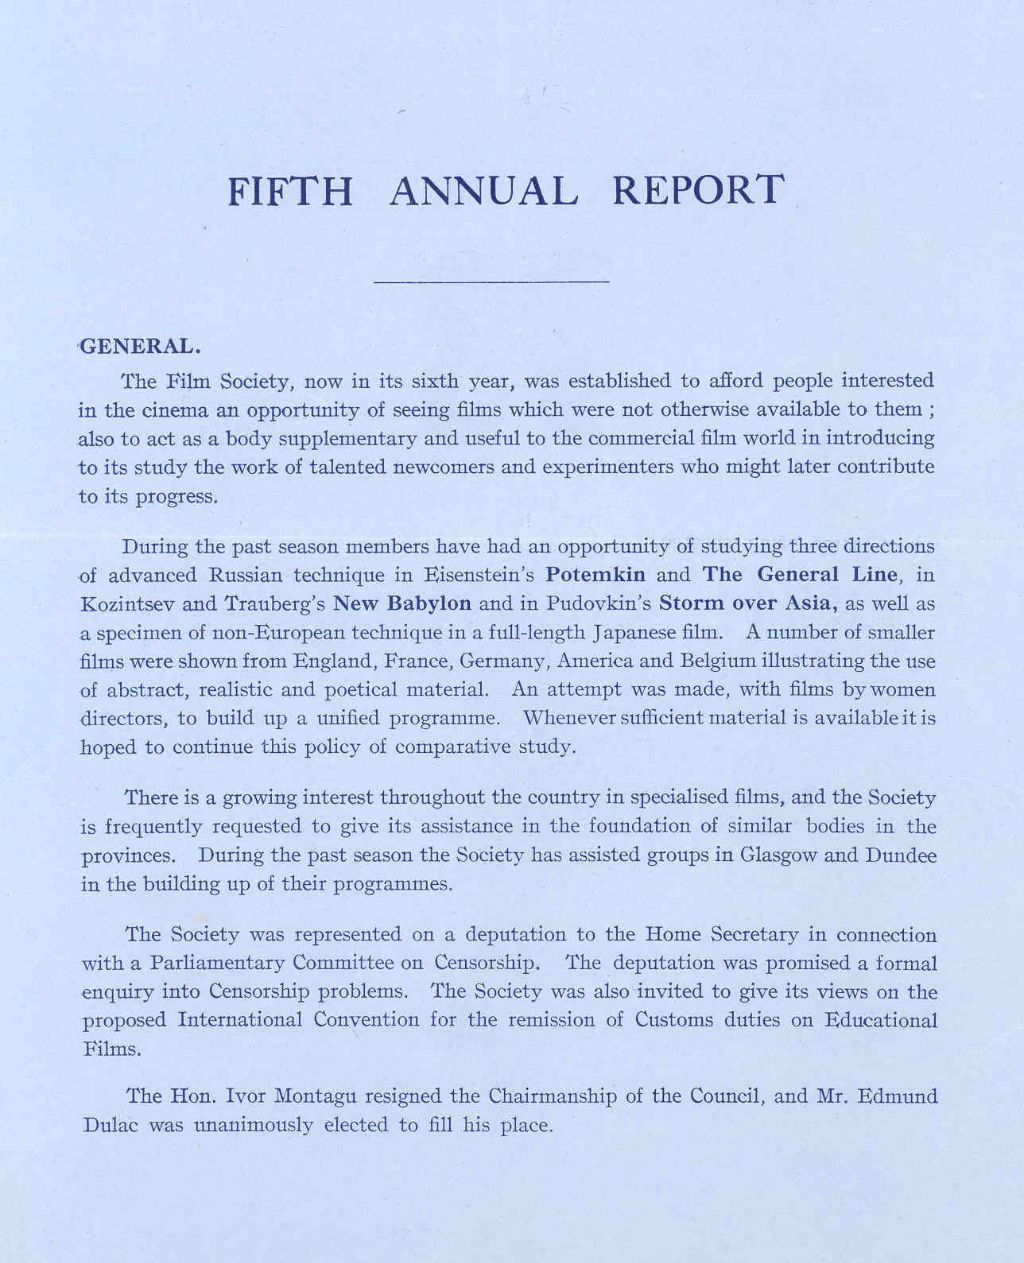 Extract from fifth annual report of the Film Society, 1930